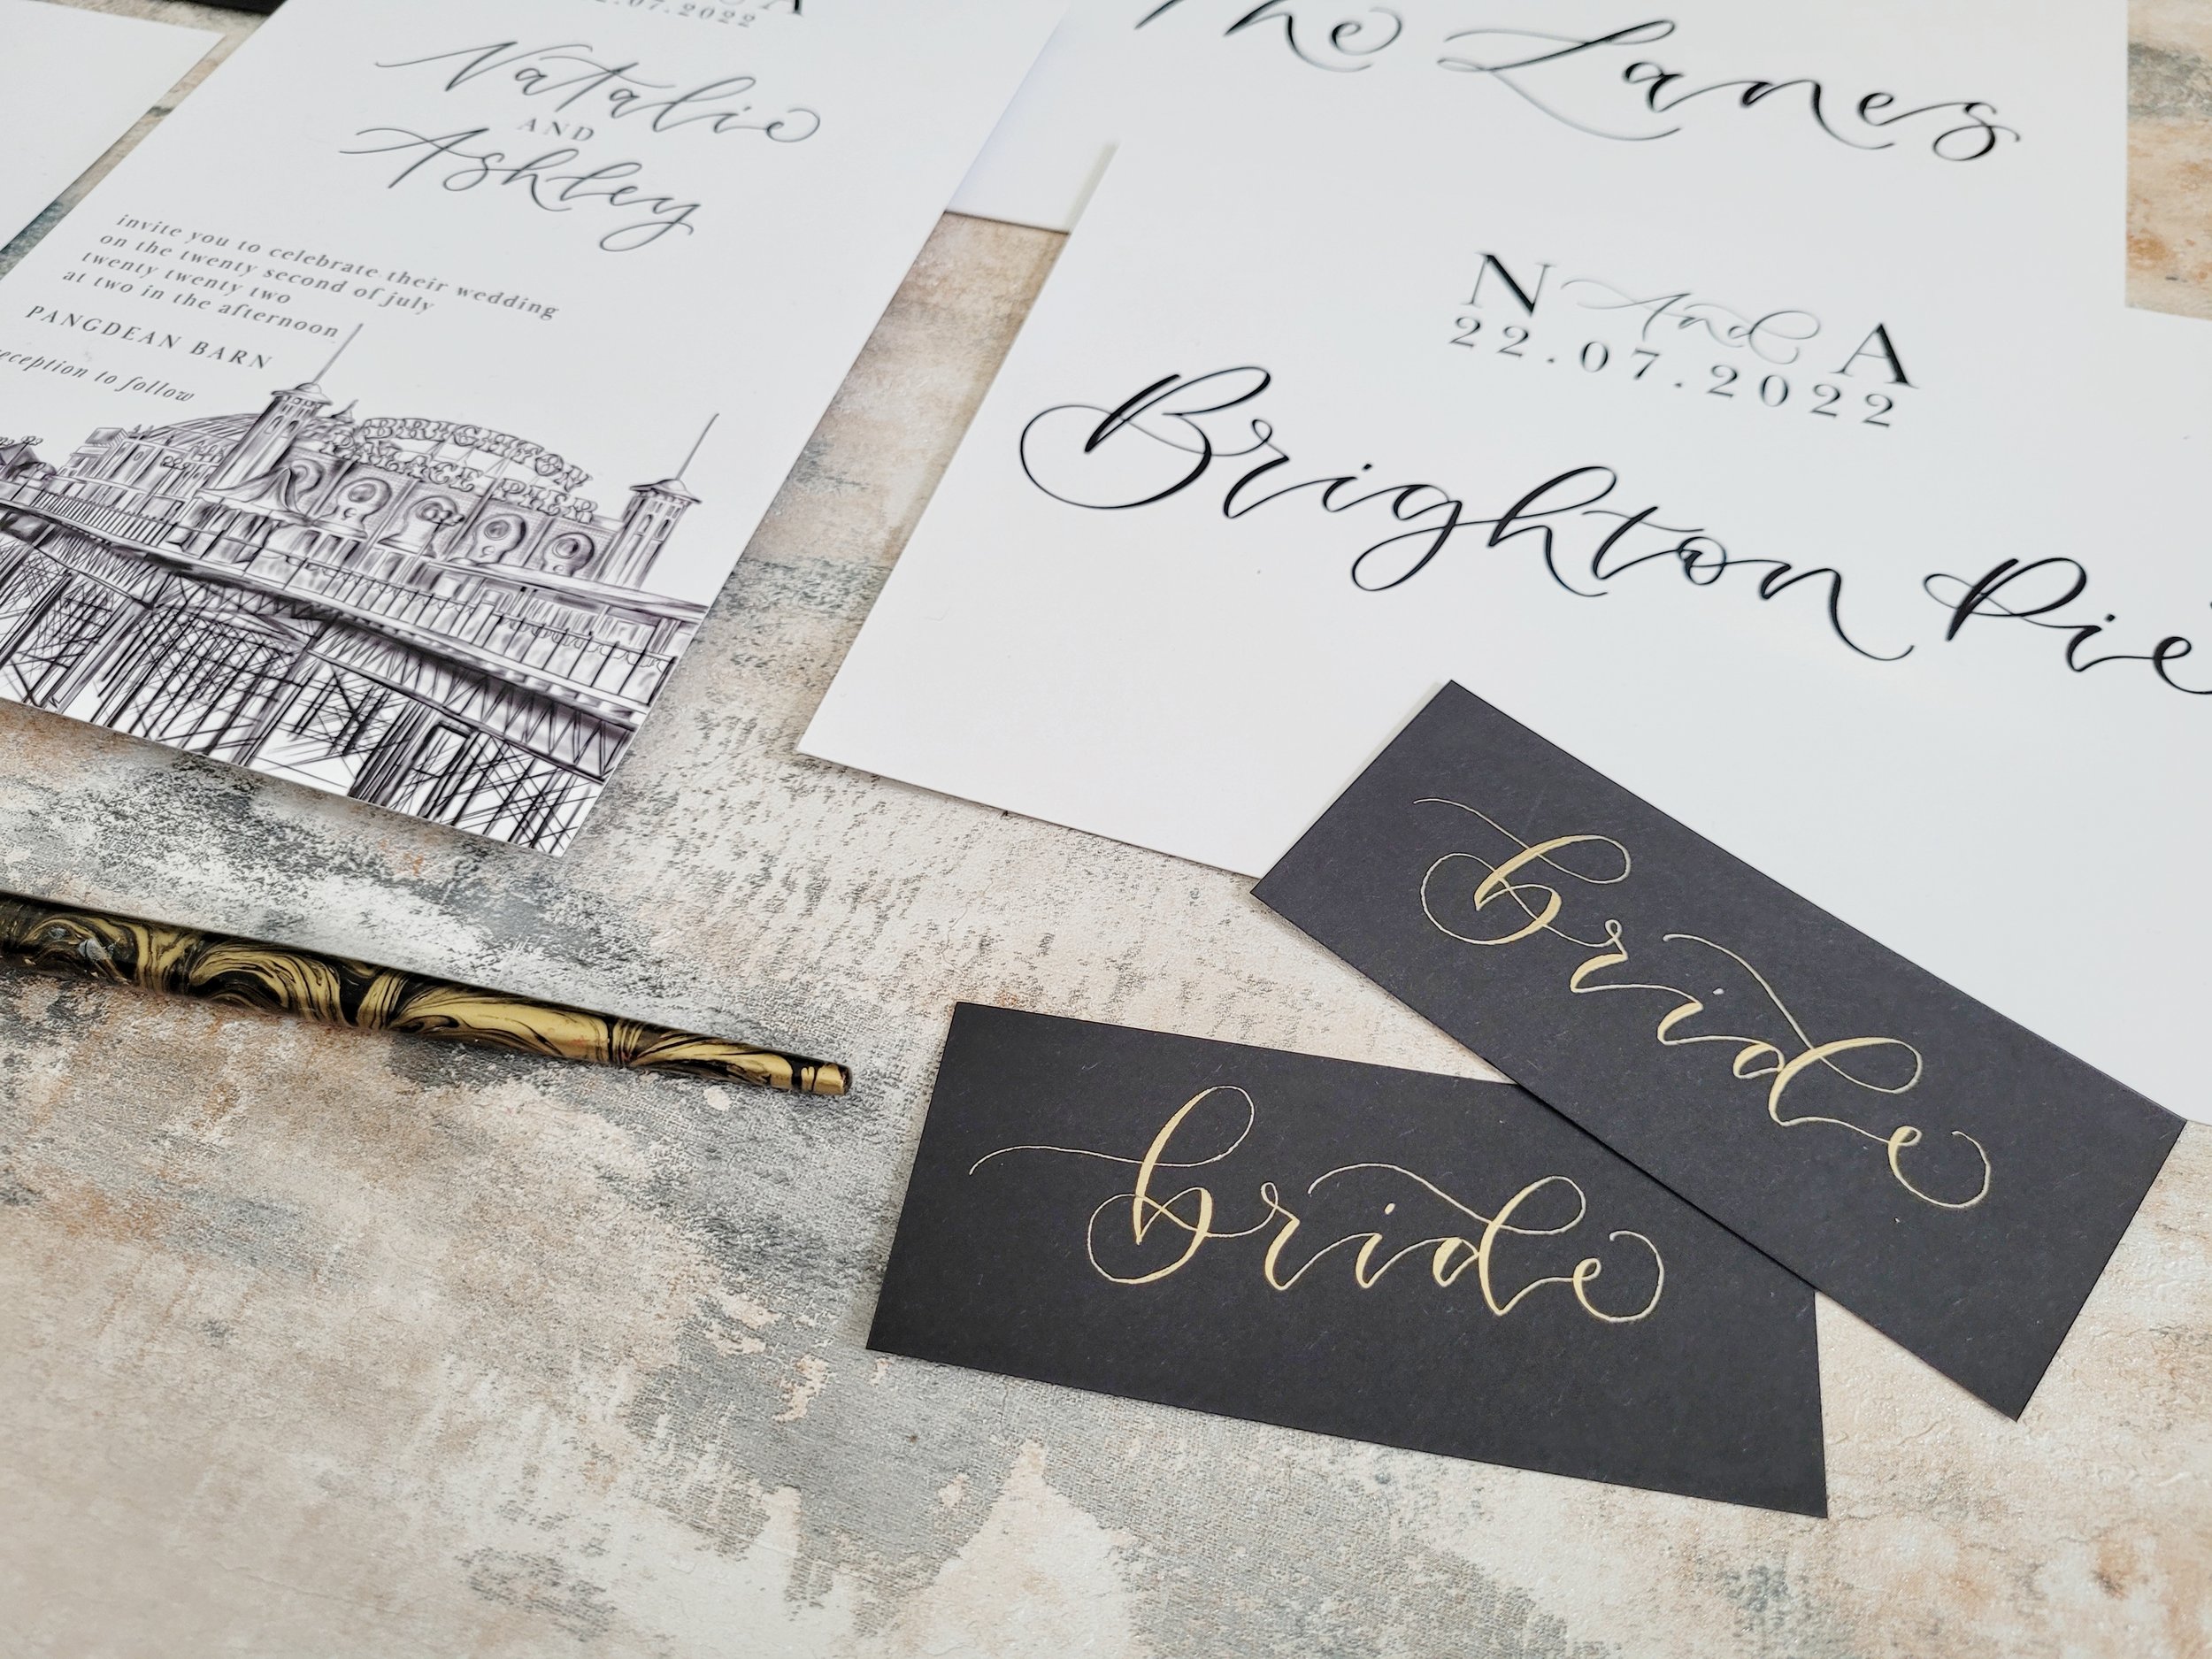 Brighton wedding stationery with pier illustration and modern calligraphy - monochrome minimalist invitation set - with black and gold place cards and Brighton themed table numbers.jpeg